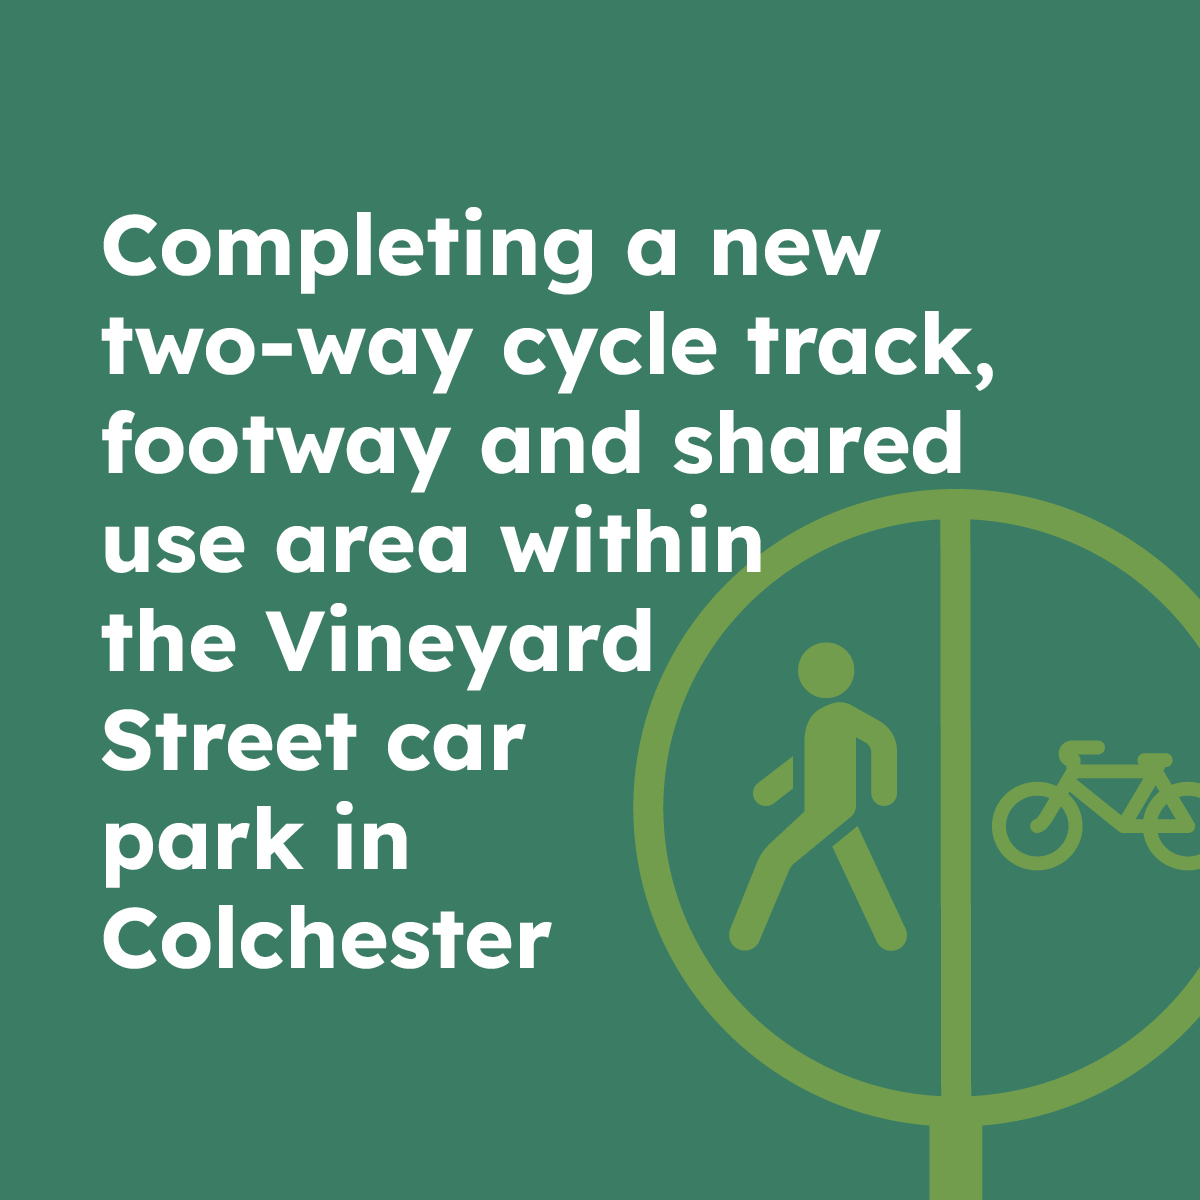 Completed a new two-way cycle track, footway and shared use area within the Vineyard Street car park in Colchester